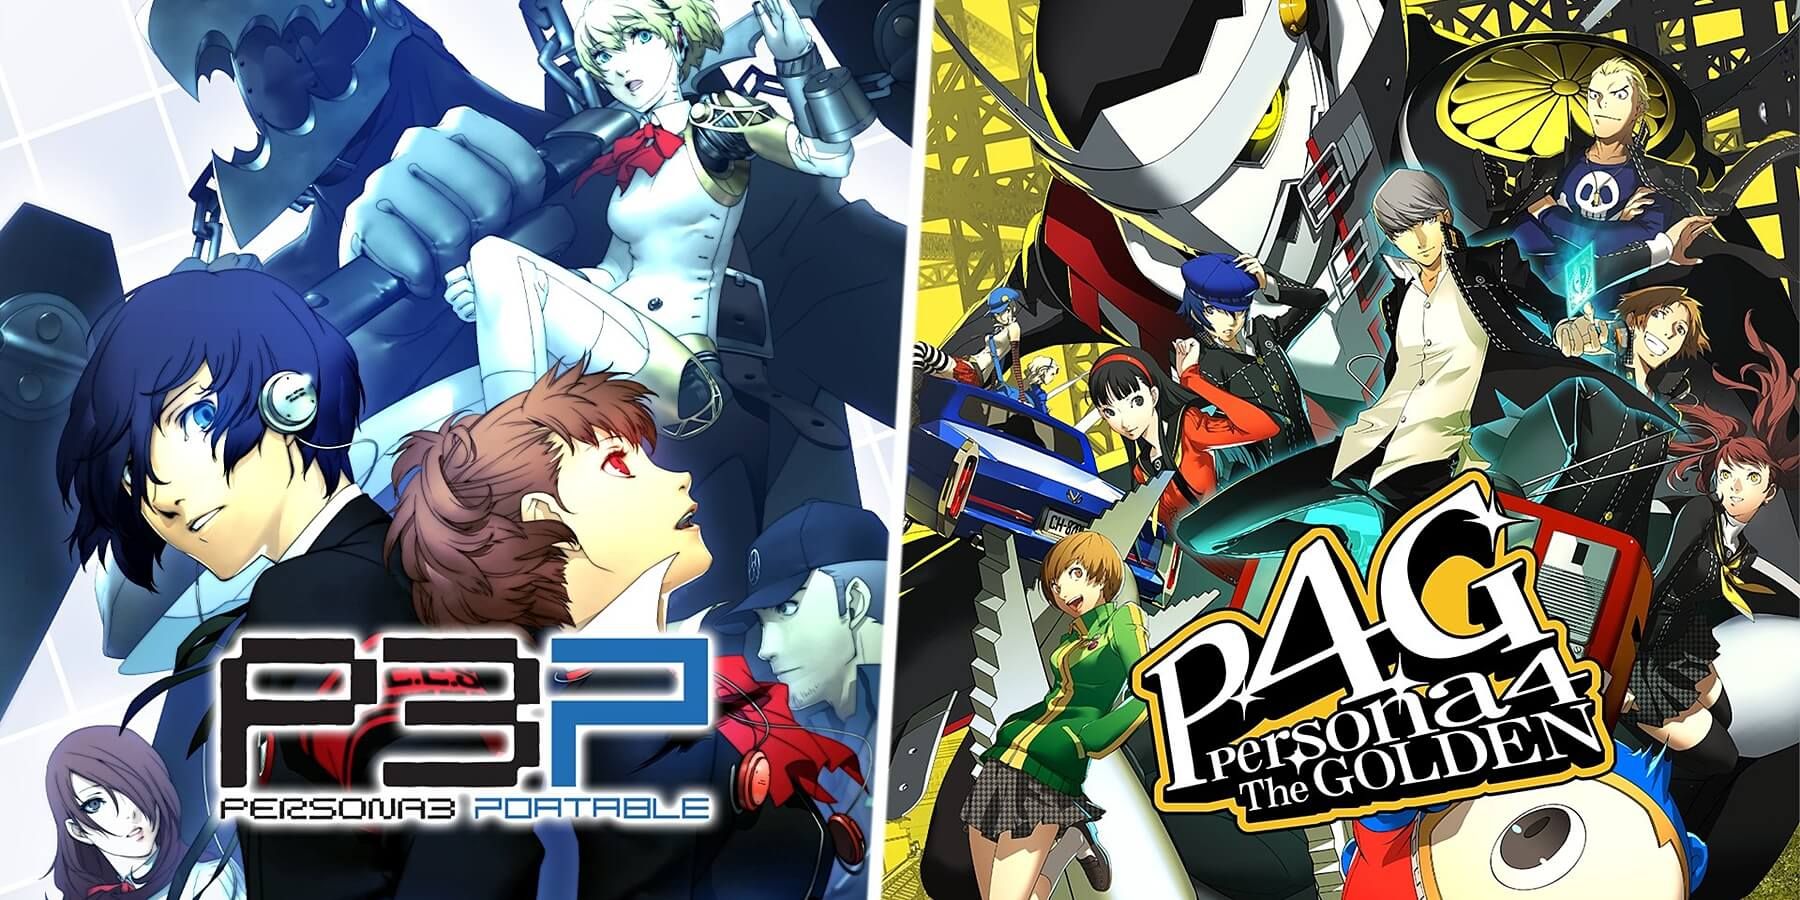 Persona 3 Portable, Persona 4 Golden Remasters Celebrate
Launch with New Trailer